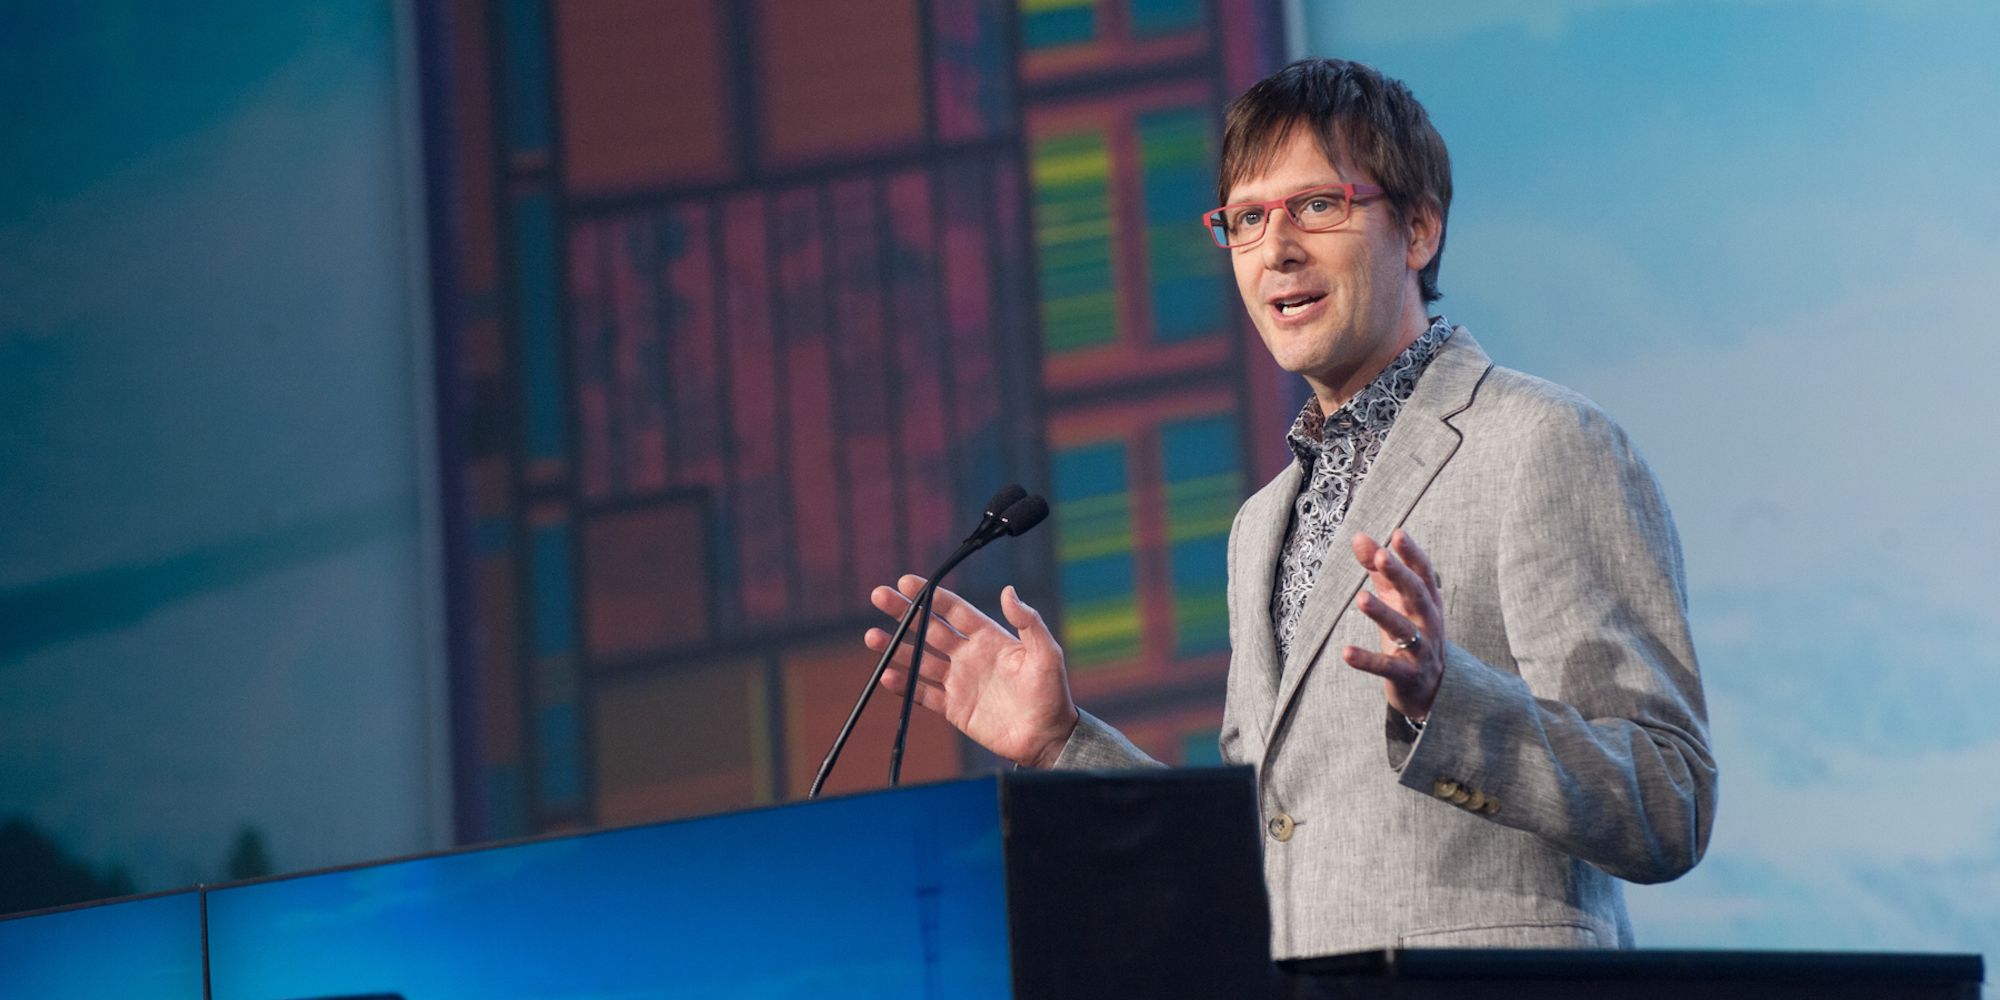 Mark cerny talking at a conference